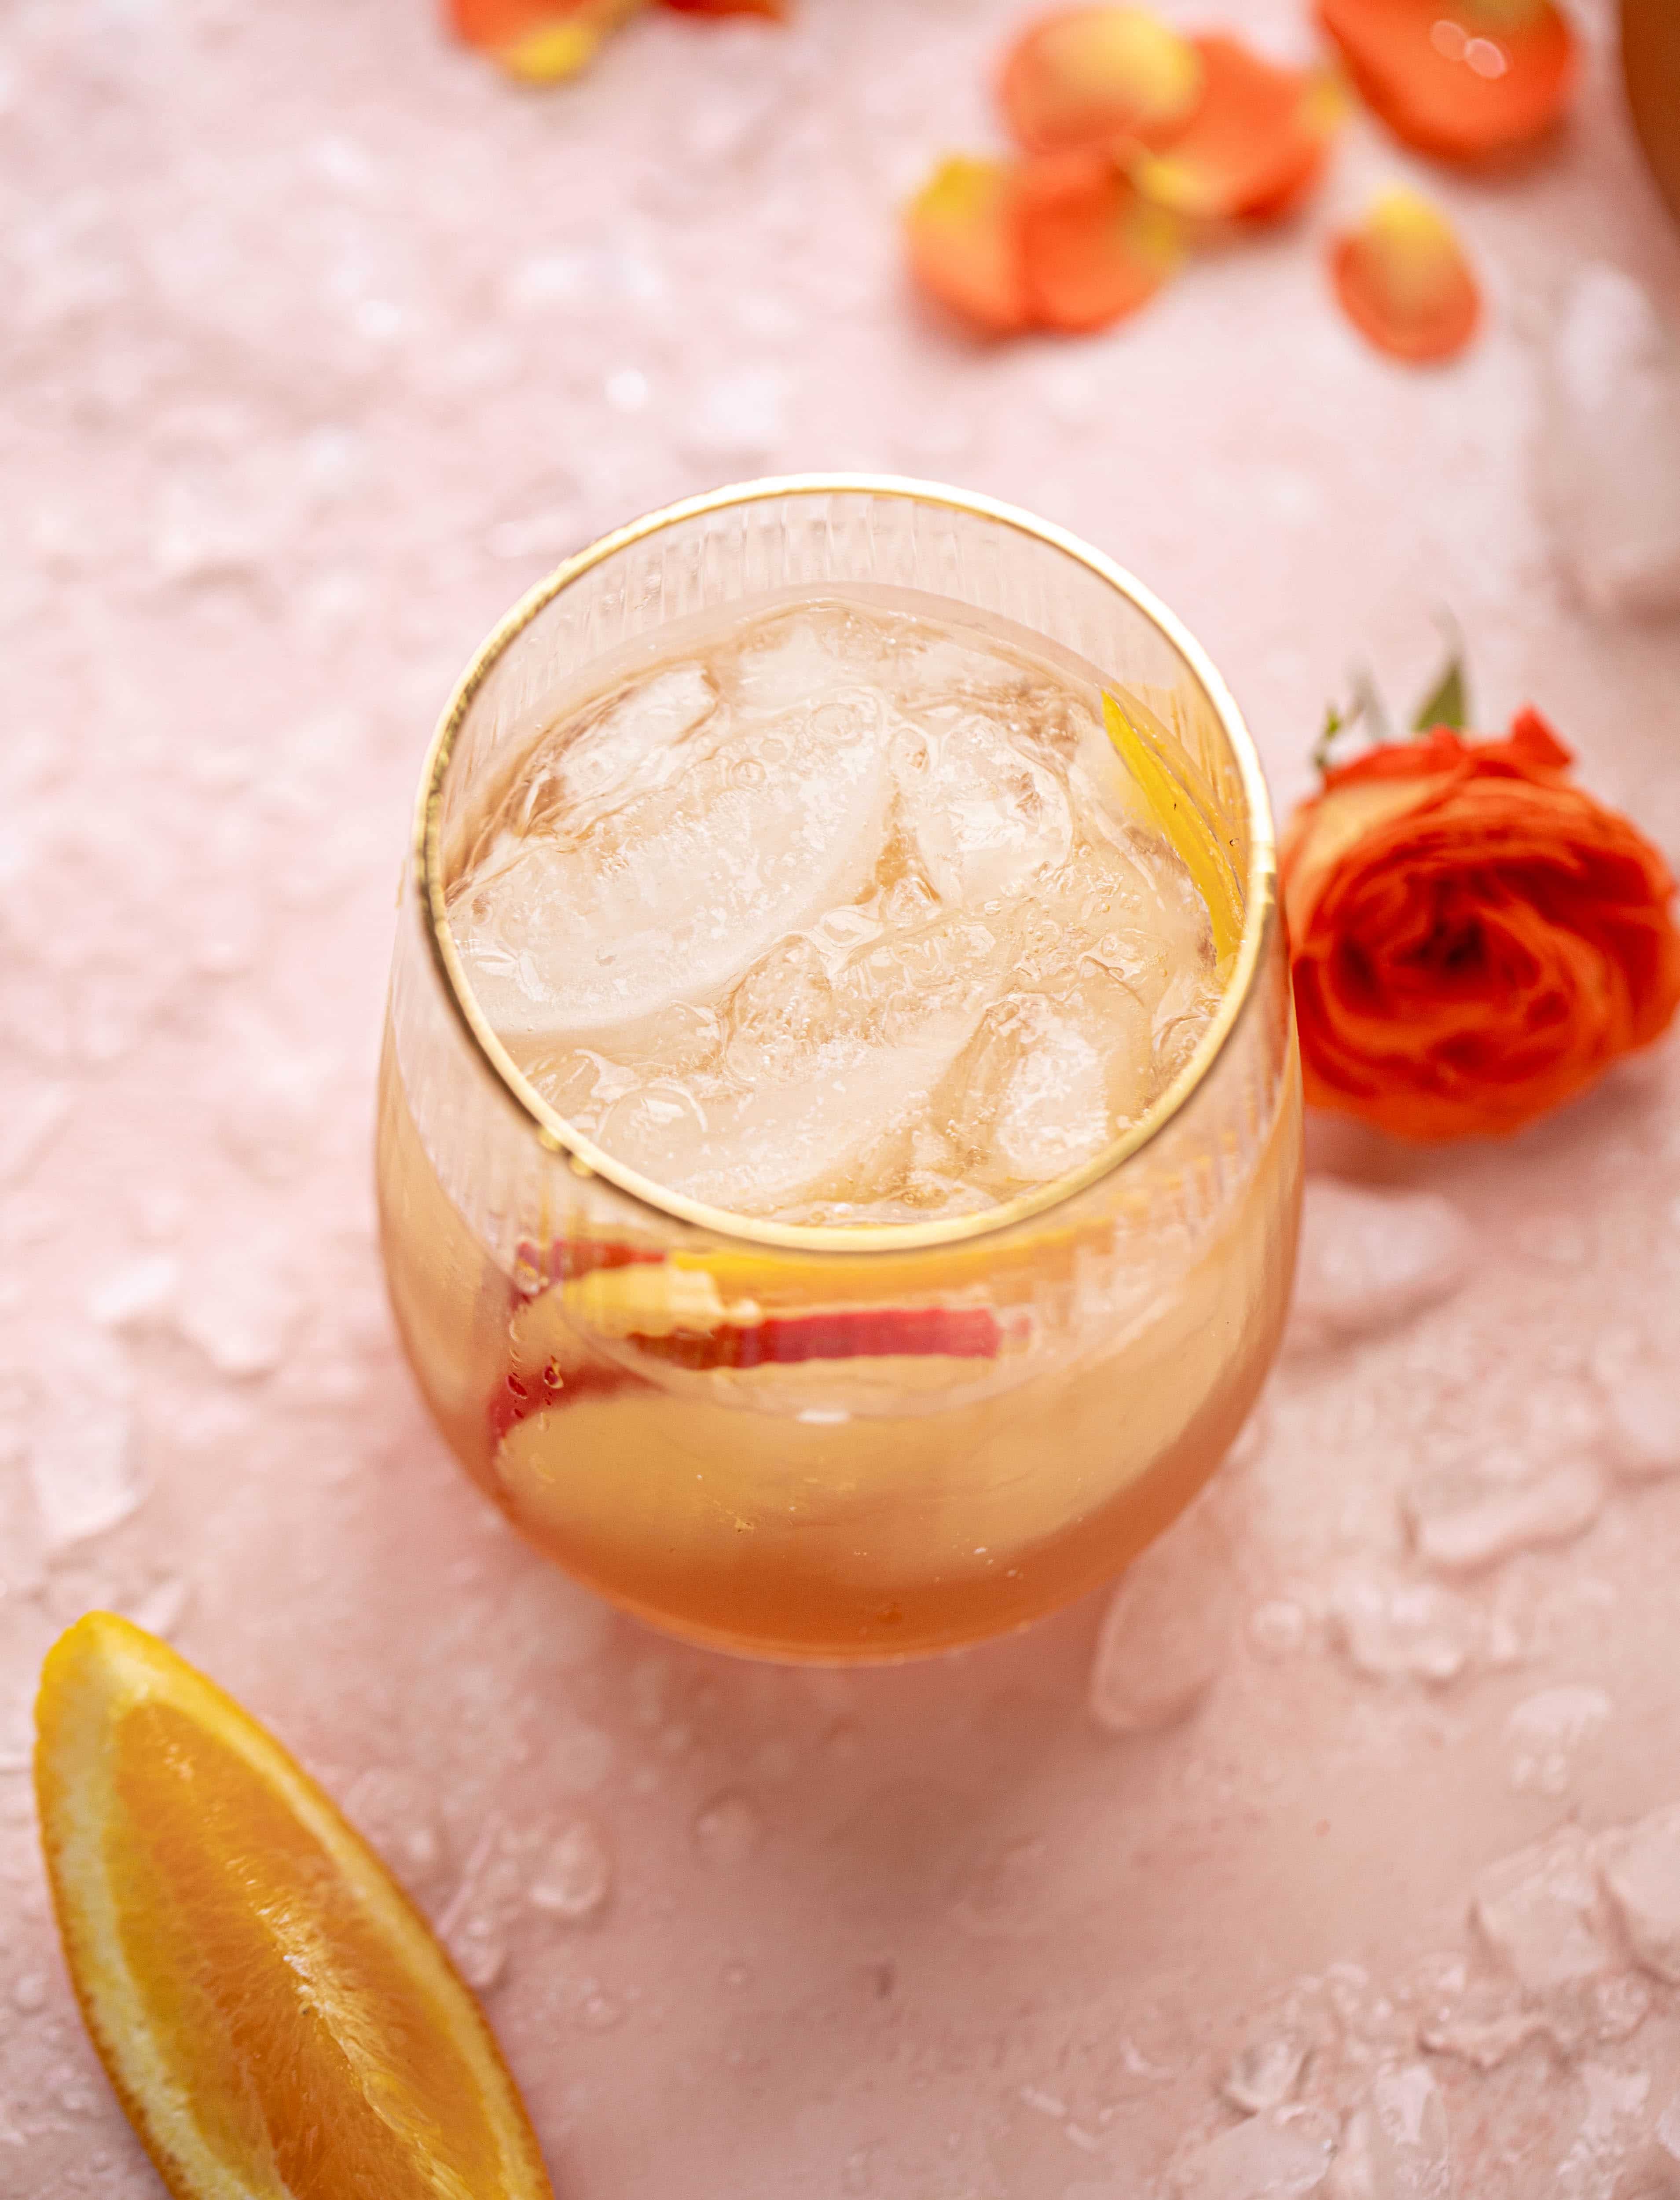 This apple cider spritz is an autumnal take on the classic aperol spritz. Apple cider, prosecco and aperol come together in this refreshing cocktail! 